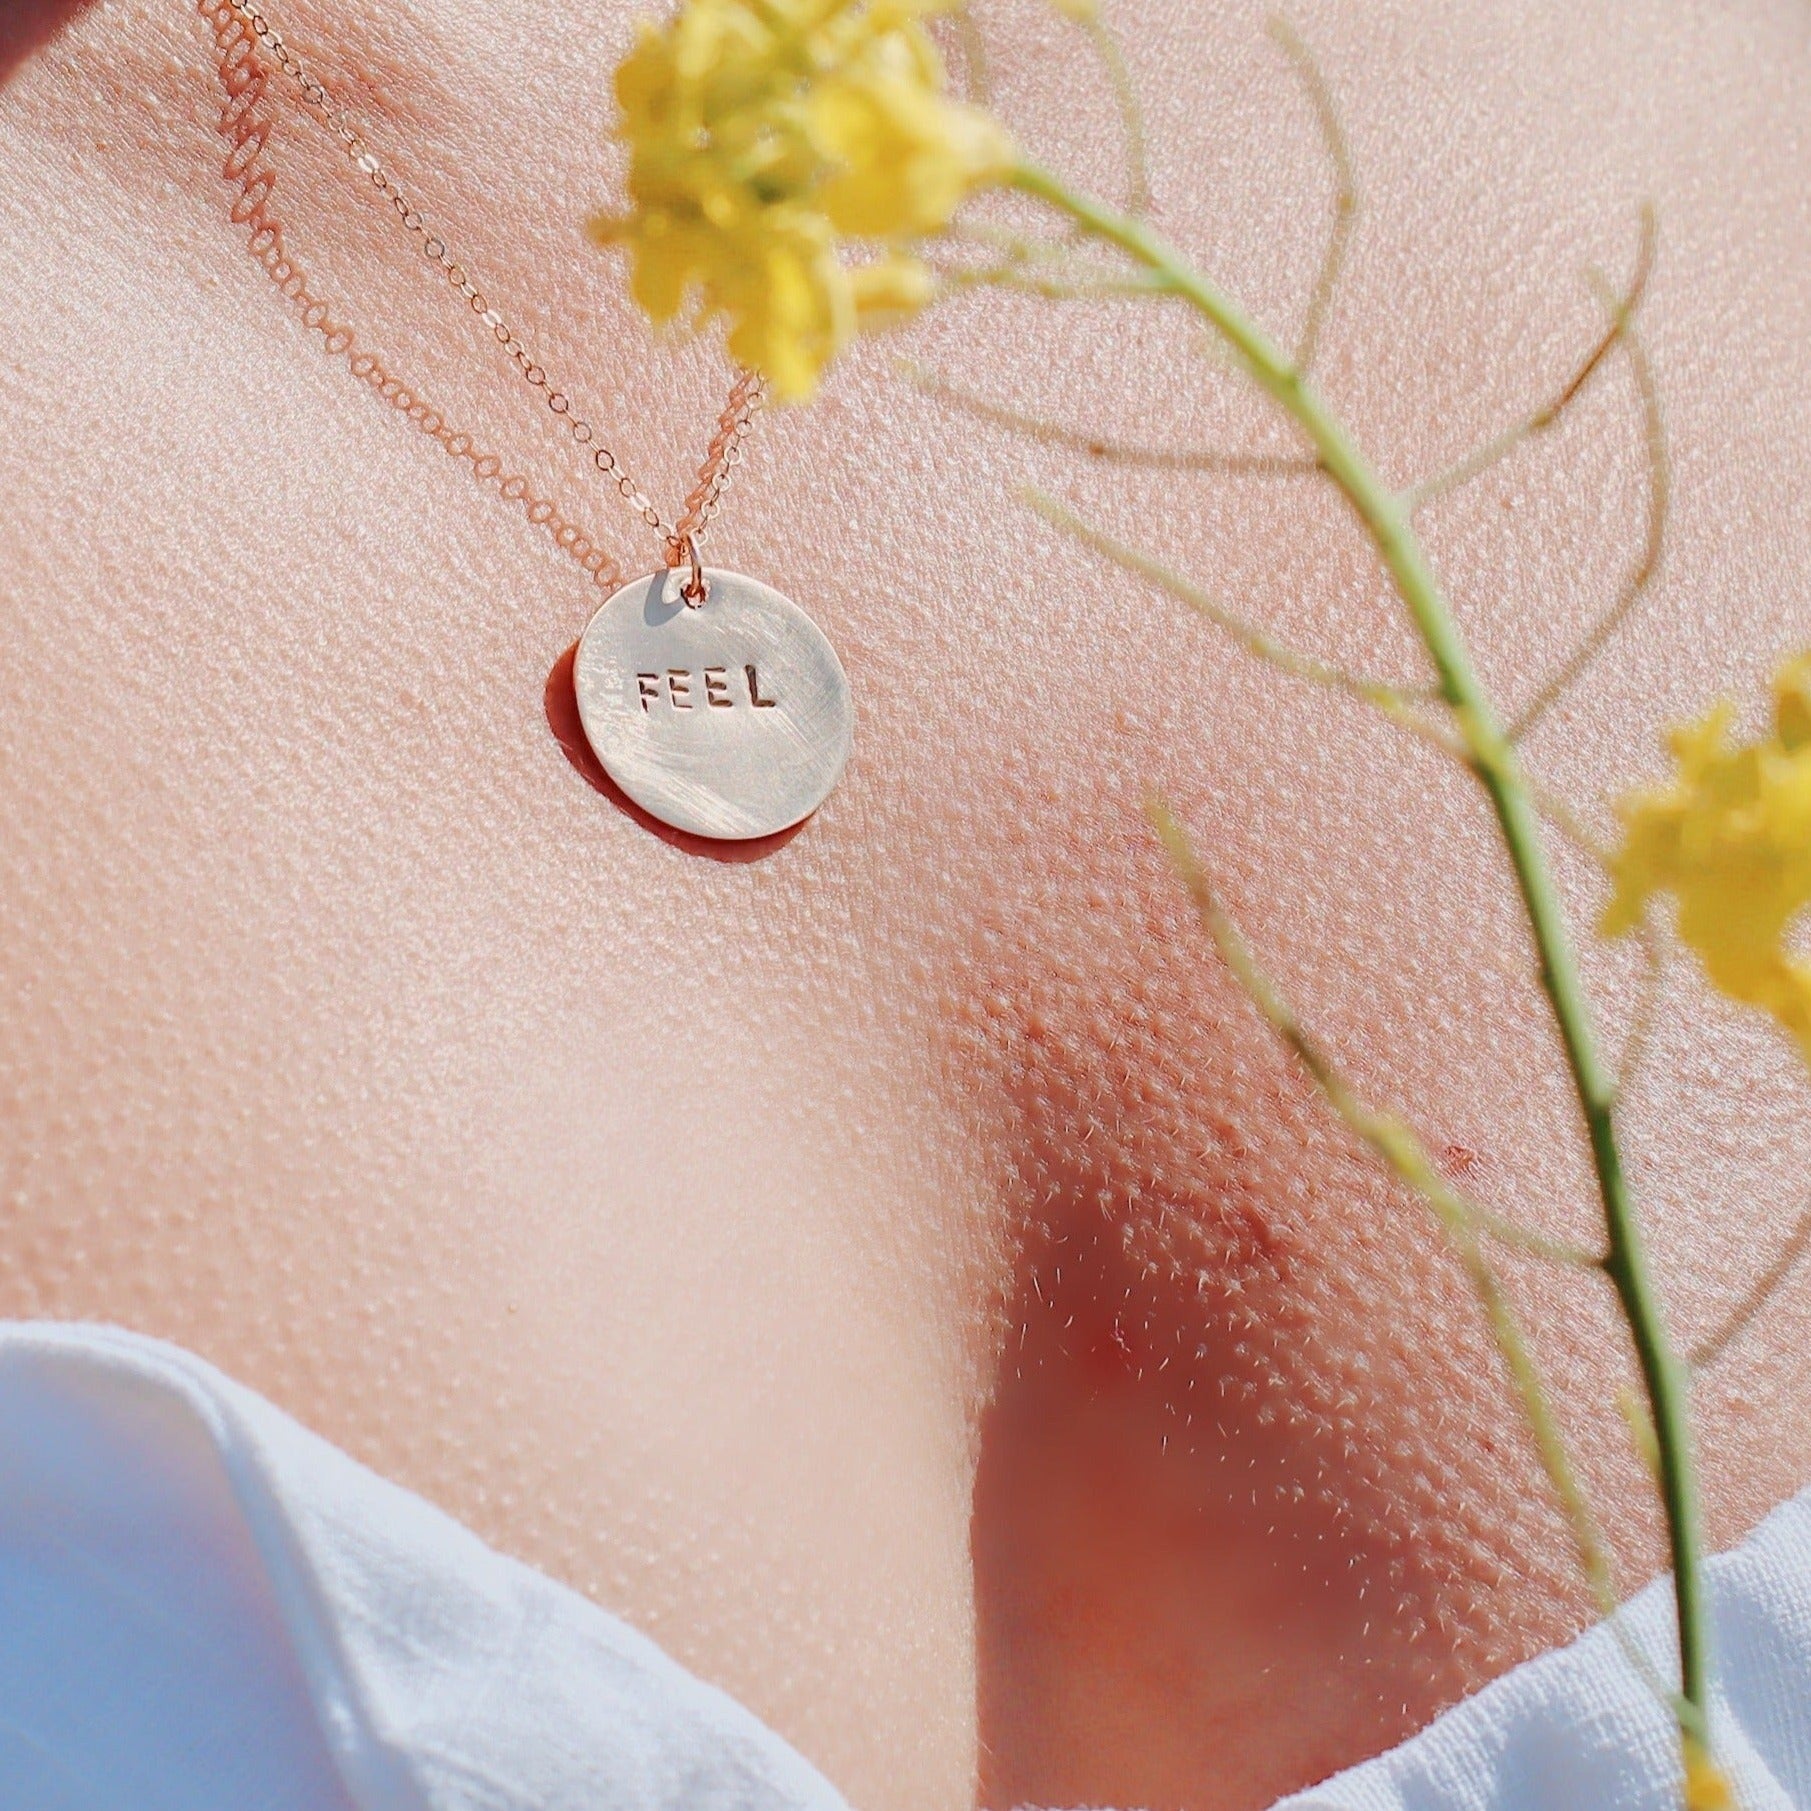 FEEL Necklace (Gold-filled, Sterling Silver)